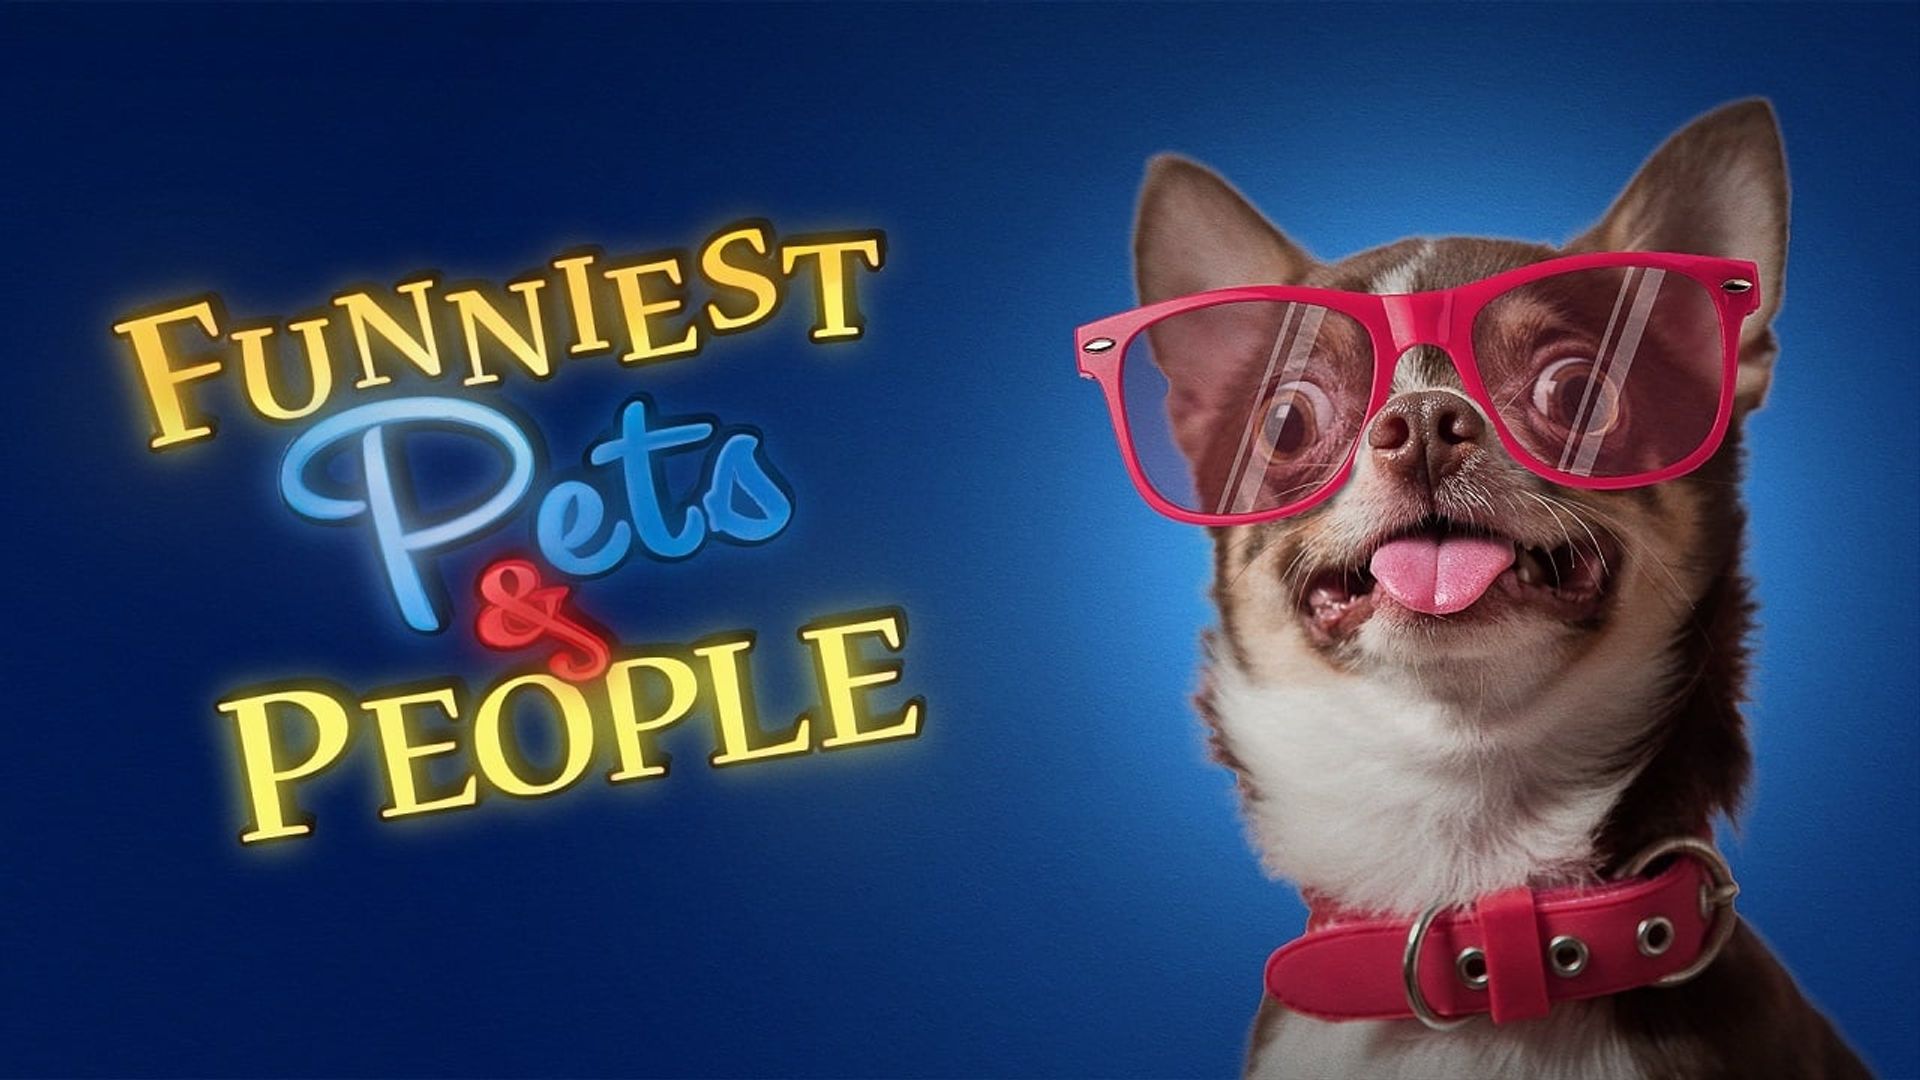 Funniest Pets & People background